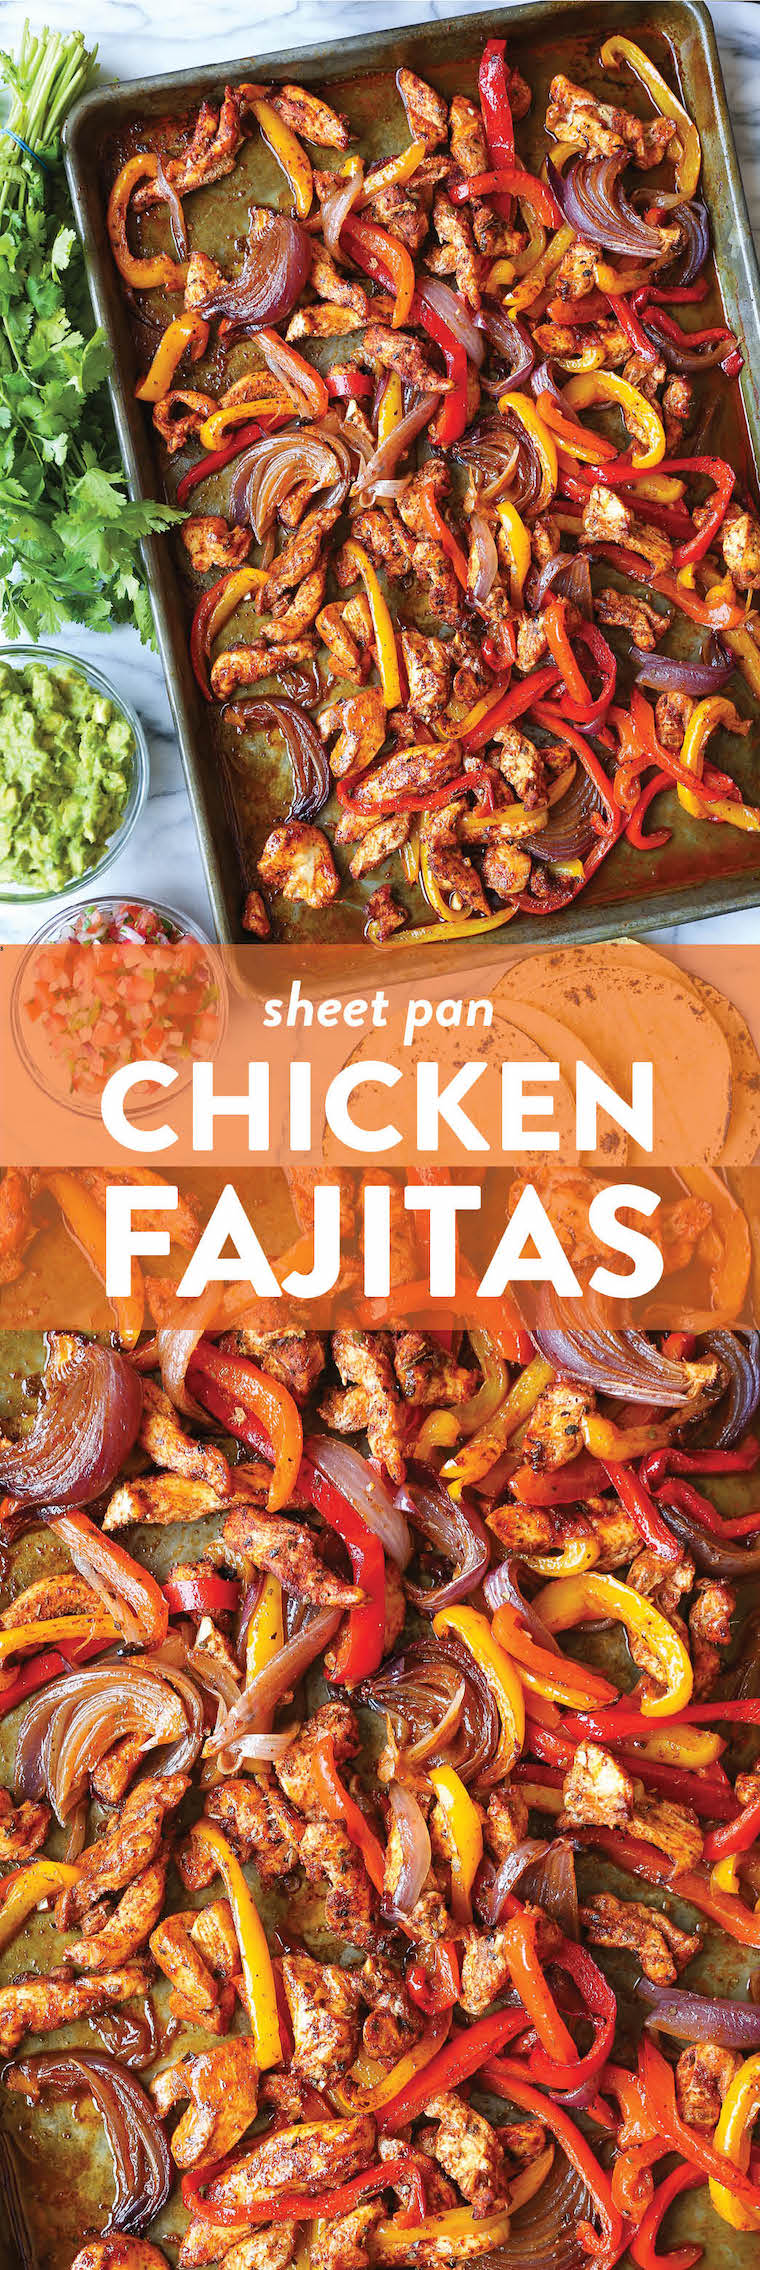 Sheet Pan Chicken Fajitas - SHEET PAN DINNER! The quickest meal you can make with amazingly tender chicken + crisp-tender veggies with the easiest clean-up!